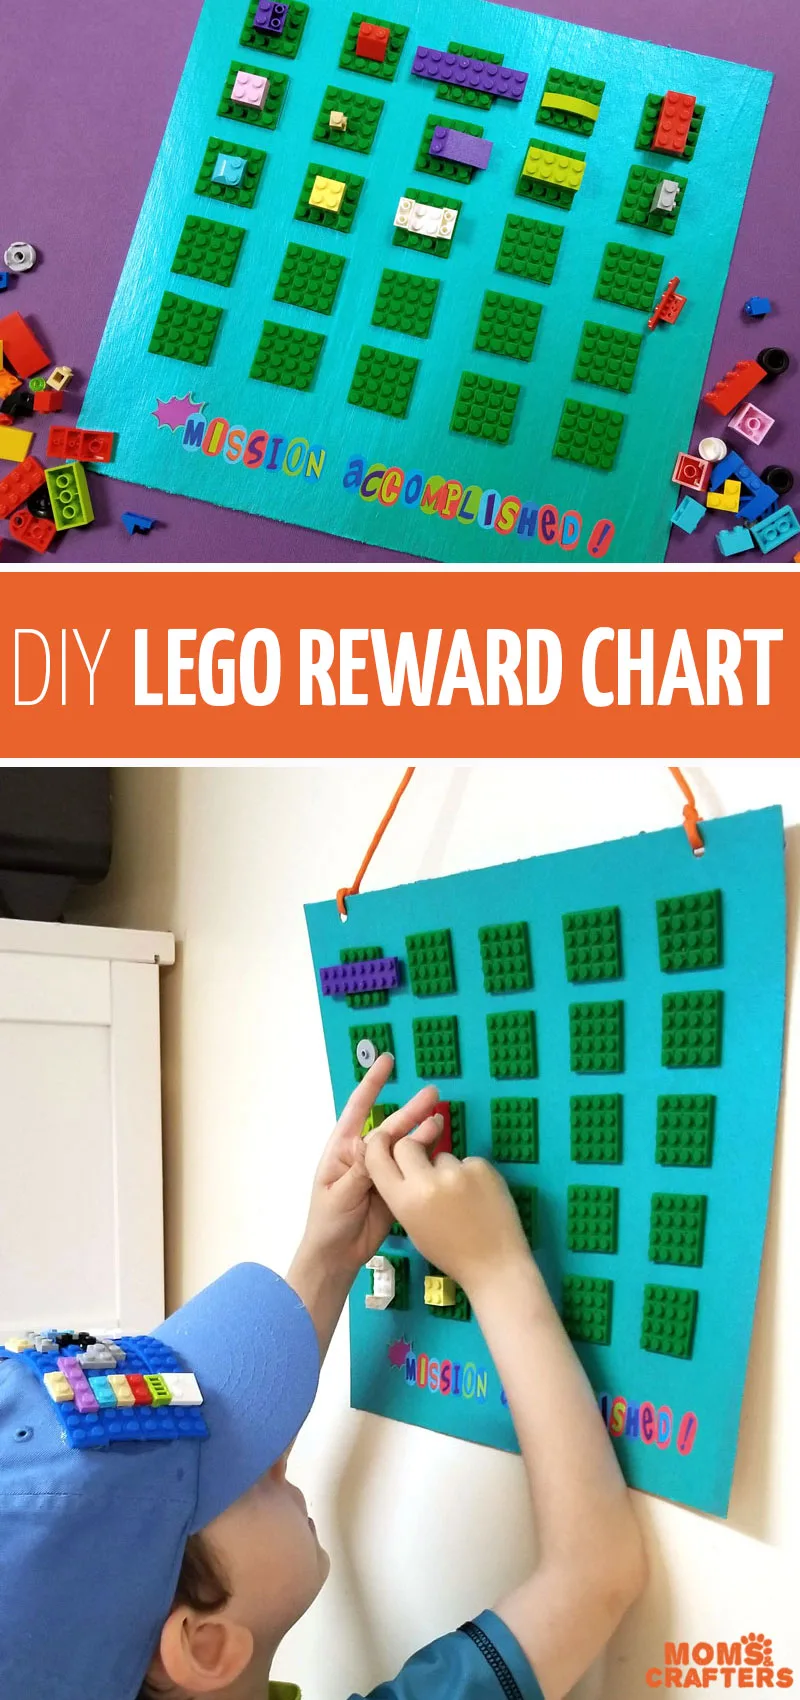 Click to learn how to make your own DIY reward chart for kids using brick tape! This LEGO rewards chart is the perfect incentive for boys and girls who love LEGO and want to earn some for their collection! #lego #diy #craftymom